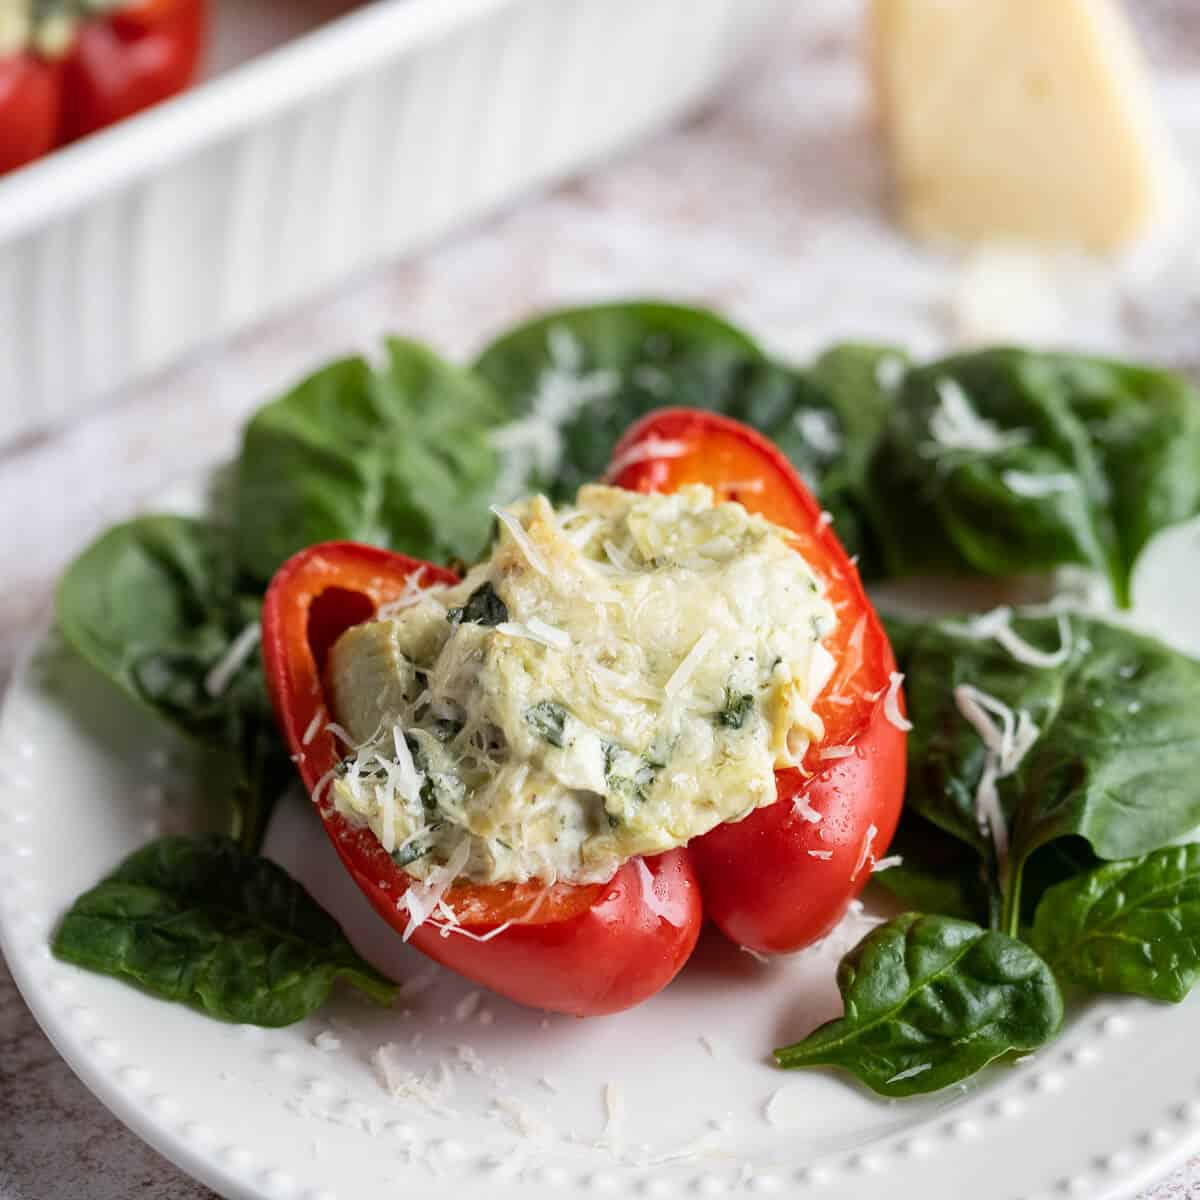 Spinach Artichoke Stuffed Peppers with Chicken